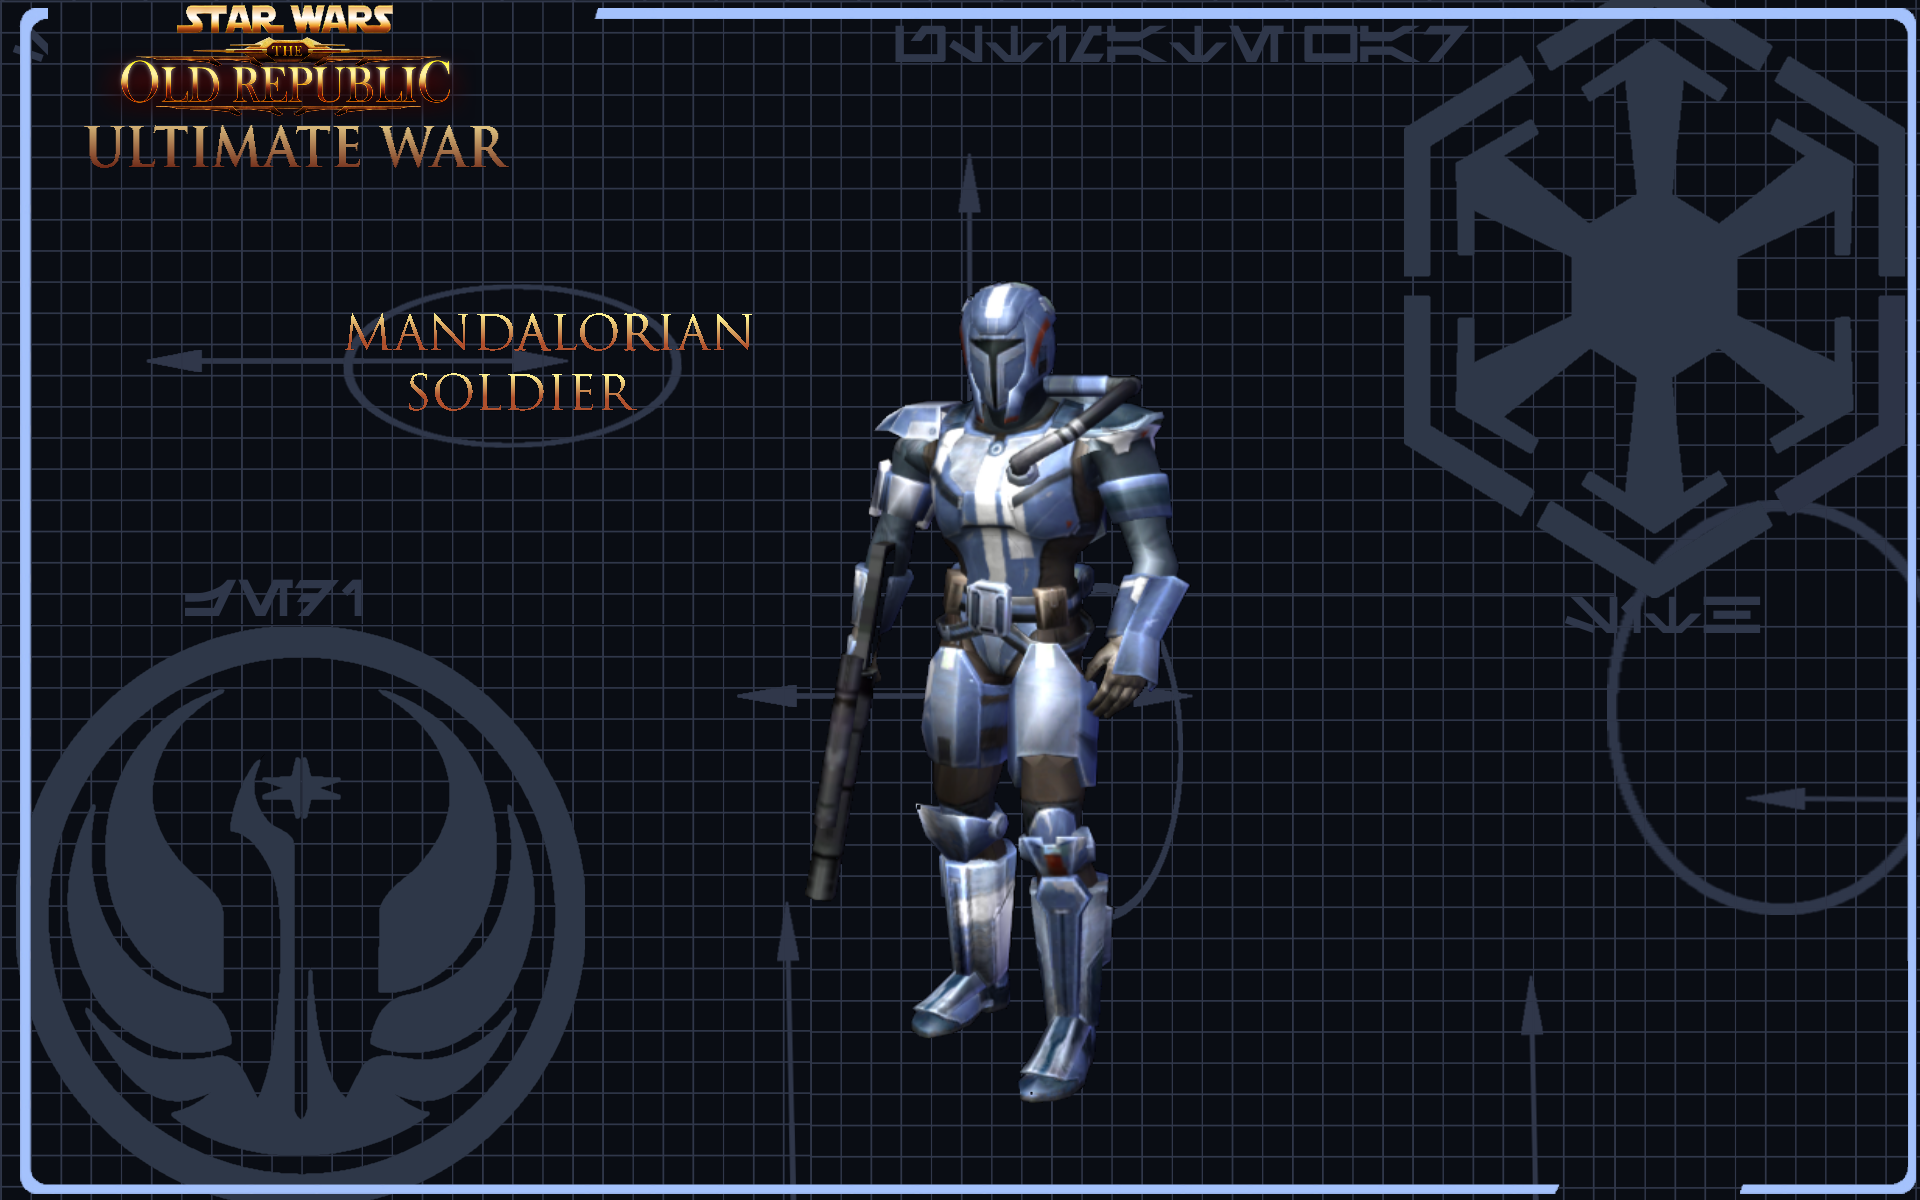 Mandalorian Soldier Image The Old Republic Ultimate War Mod For Star Wars Empire At War Forces Of Corruption Mod Db